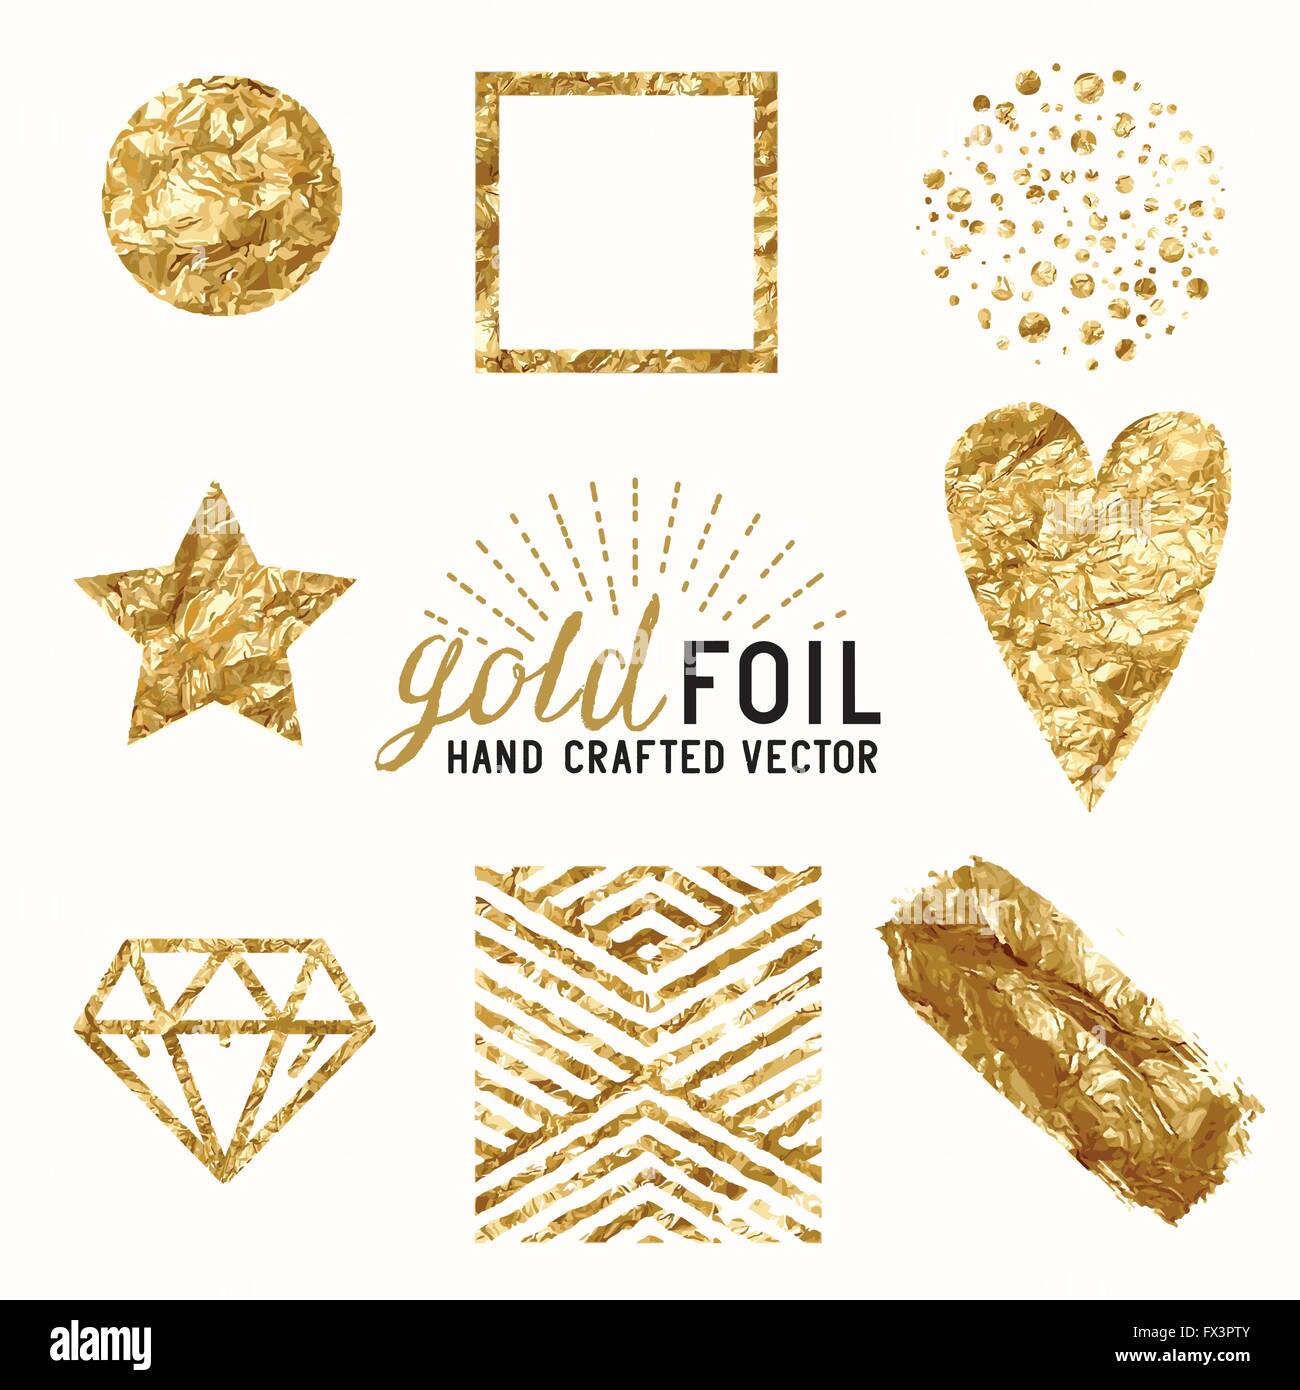 Vector Gold Foil Effect Set. A collection of gold foil items including gold dust, gold foil wrap, gold dots and patterns. Vector Stock Vector